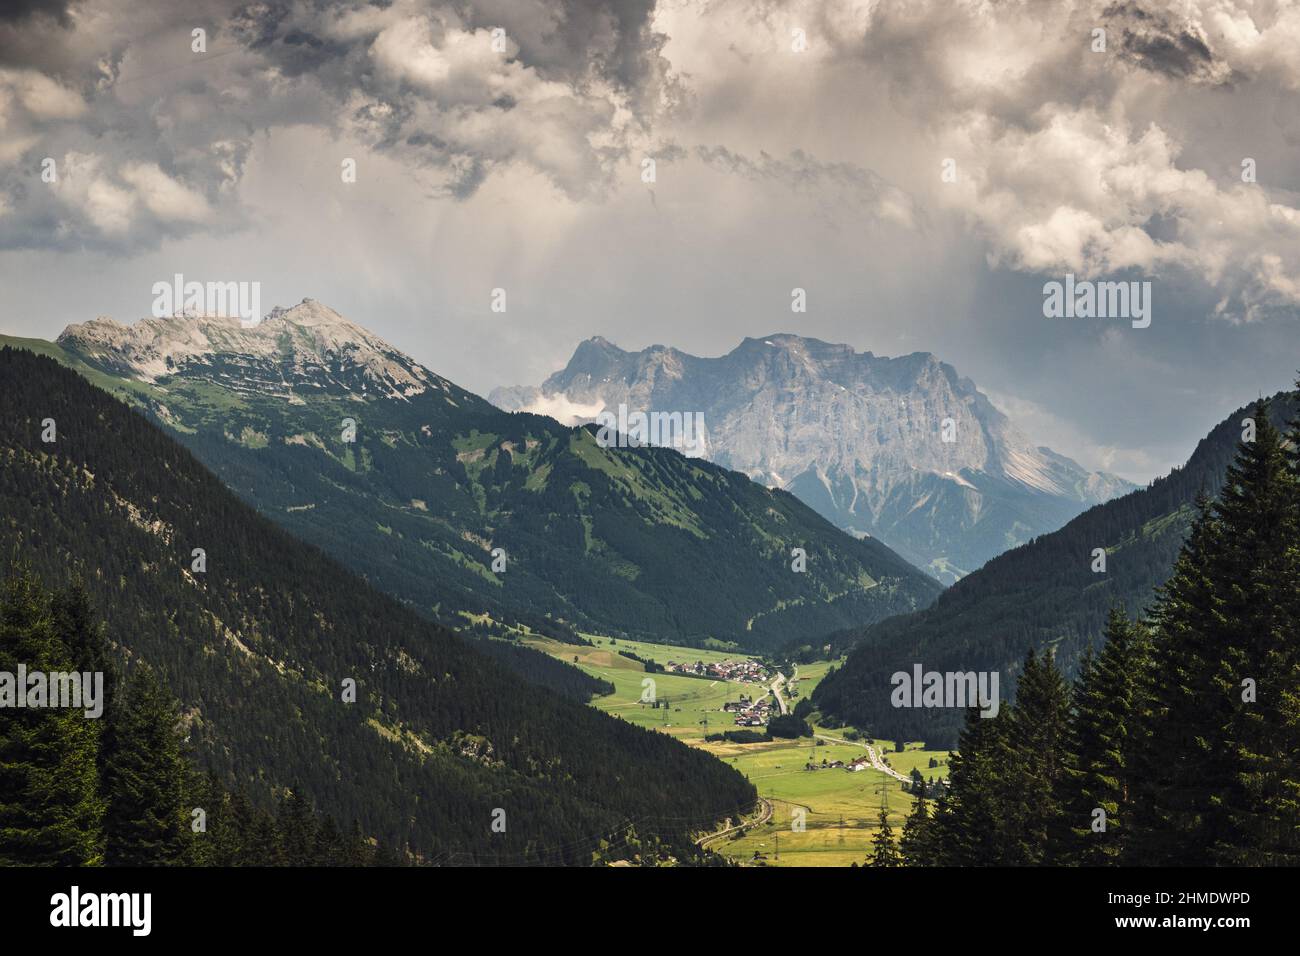 Scenic view of mountain landscape and cloudy sky, Austria Stock Photo